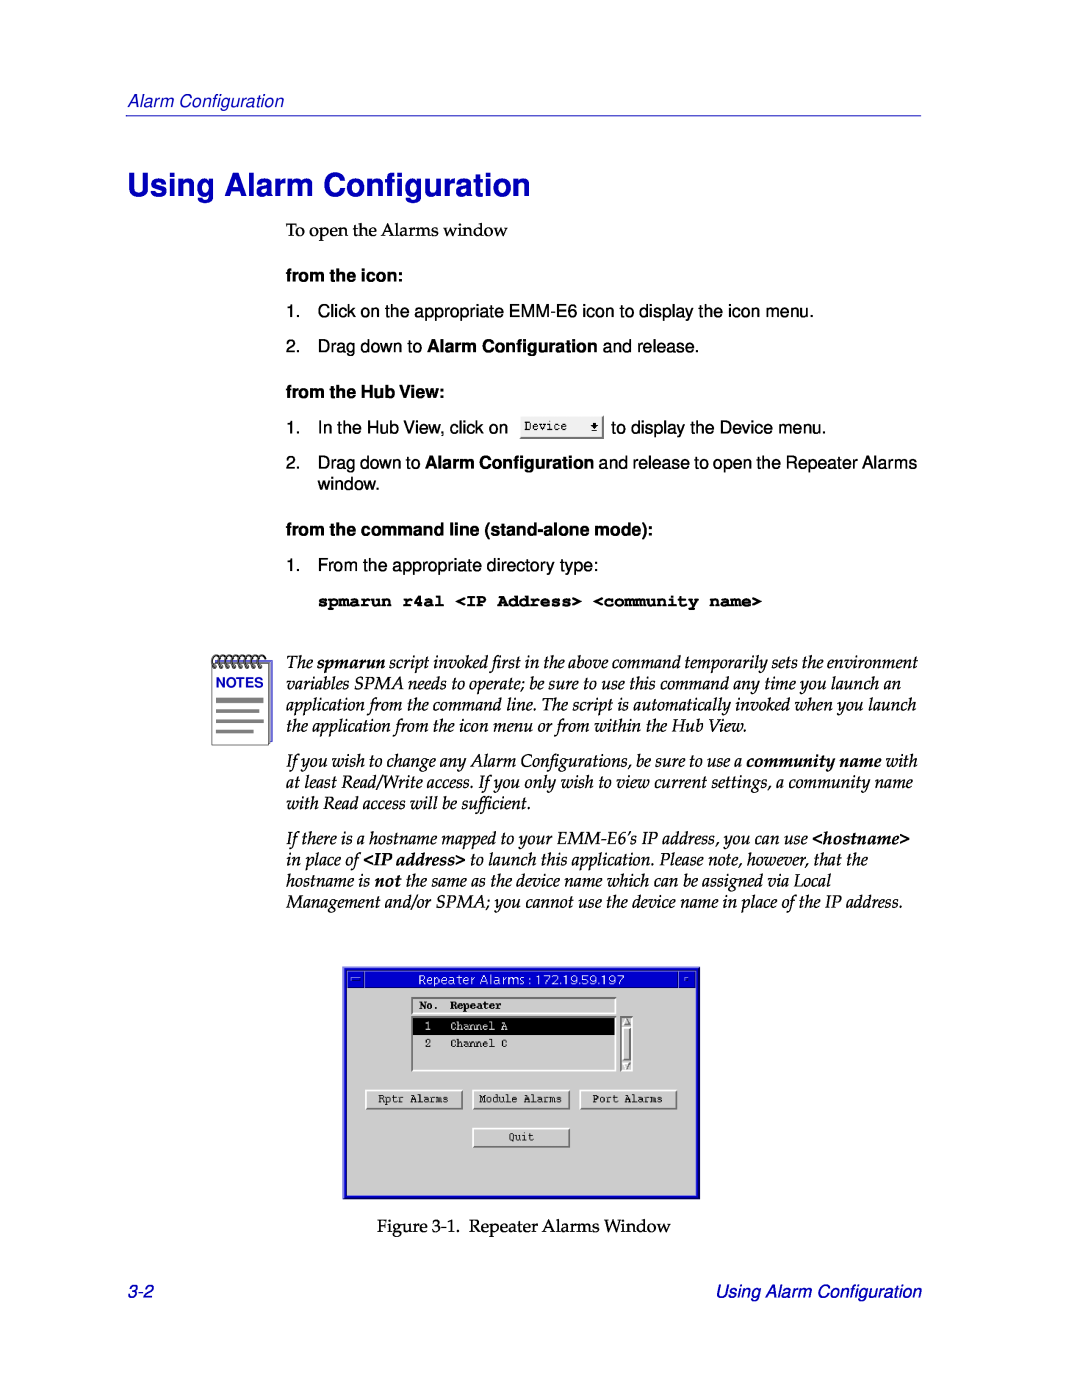 Cabletron Systems EMM-E6 manual Using Alarm Conﬁguration, from the icon, from the Hub View 